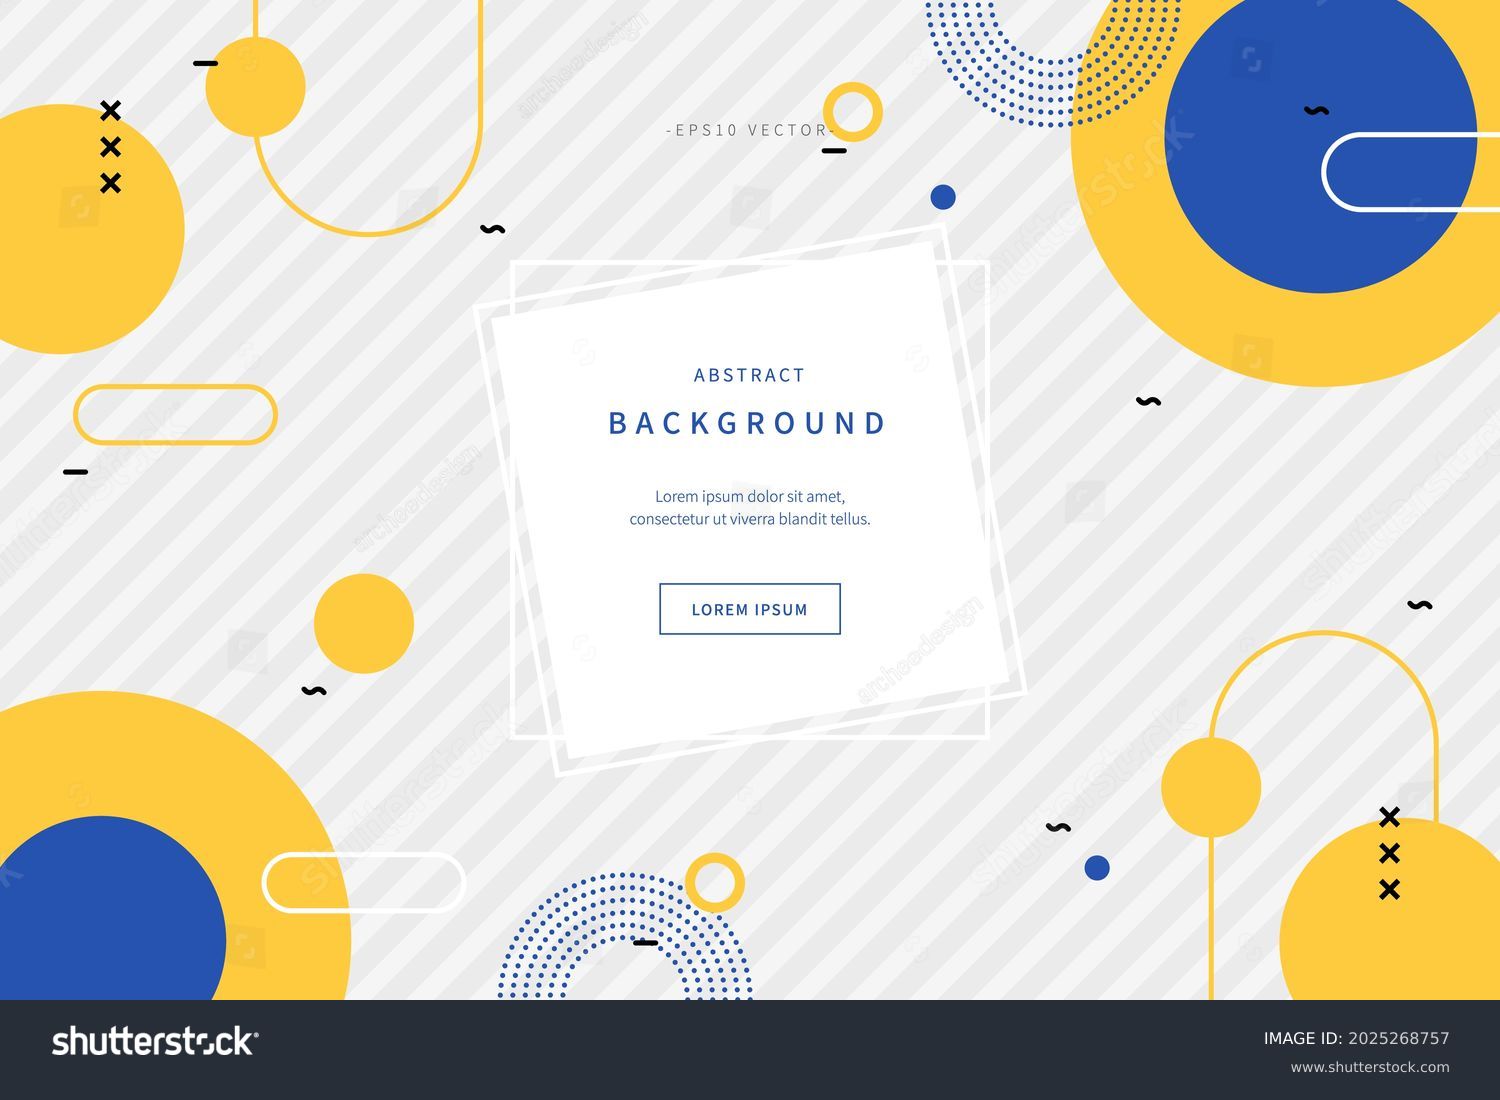 abstract background inspired by memphis style. colorful illustration with geometric shapes. flat  simple design for web page, cover, editorial, advertisement, flyer and sns. vector of eps version 10. #2025268757